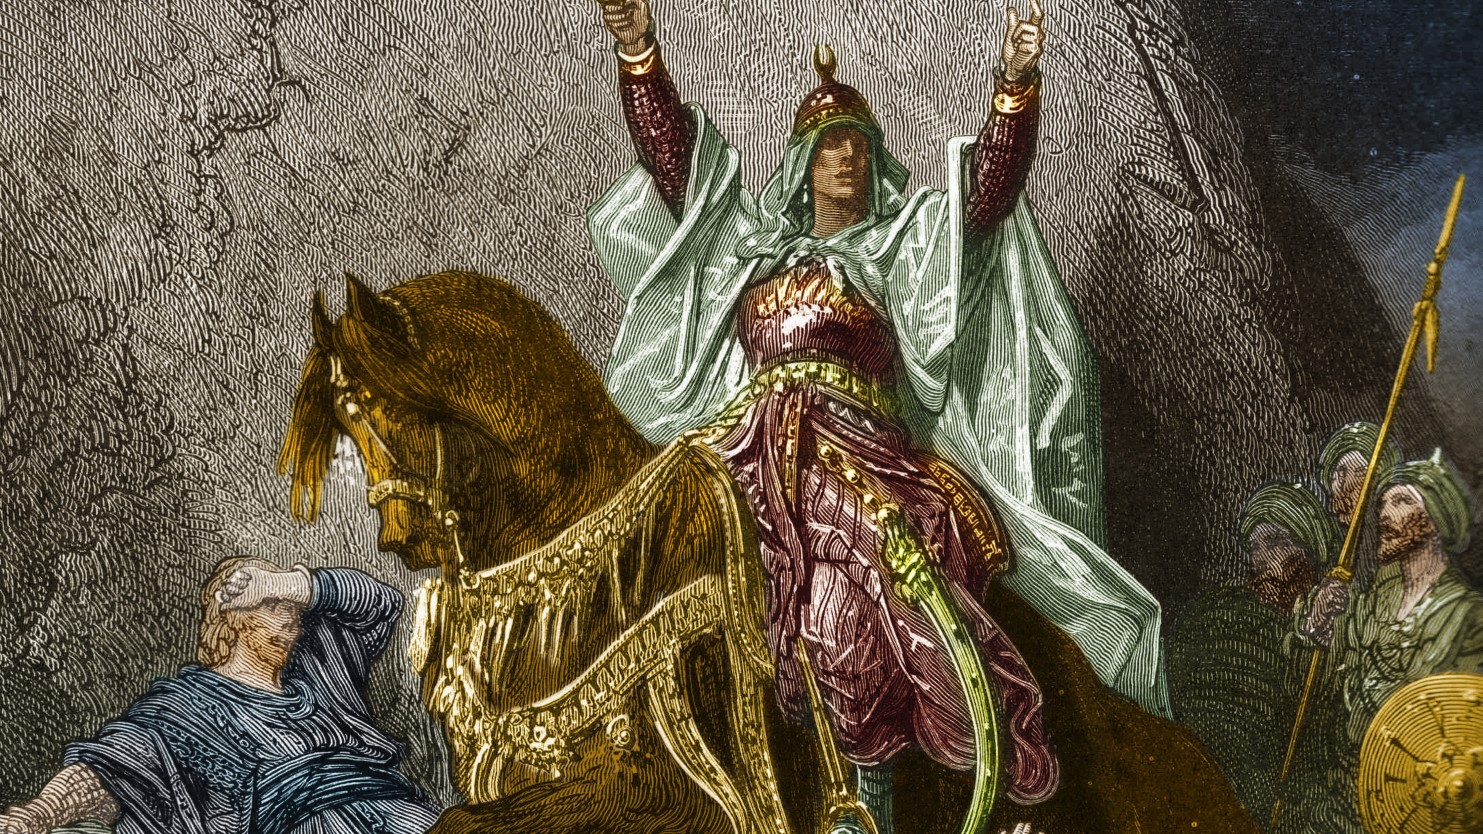 Illustration of Saladin by Gustave Dore, colorized